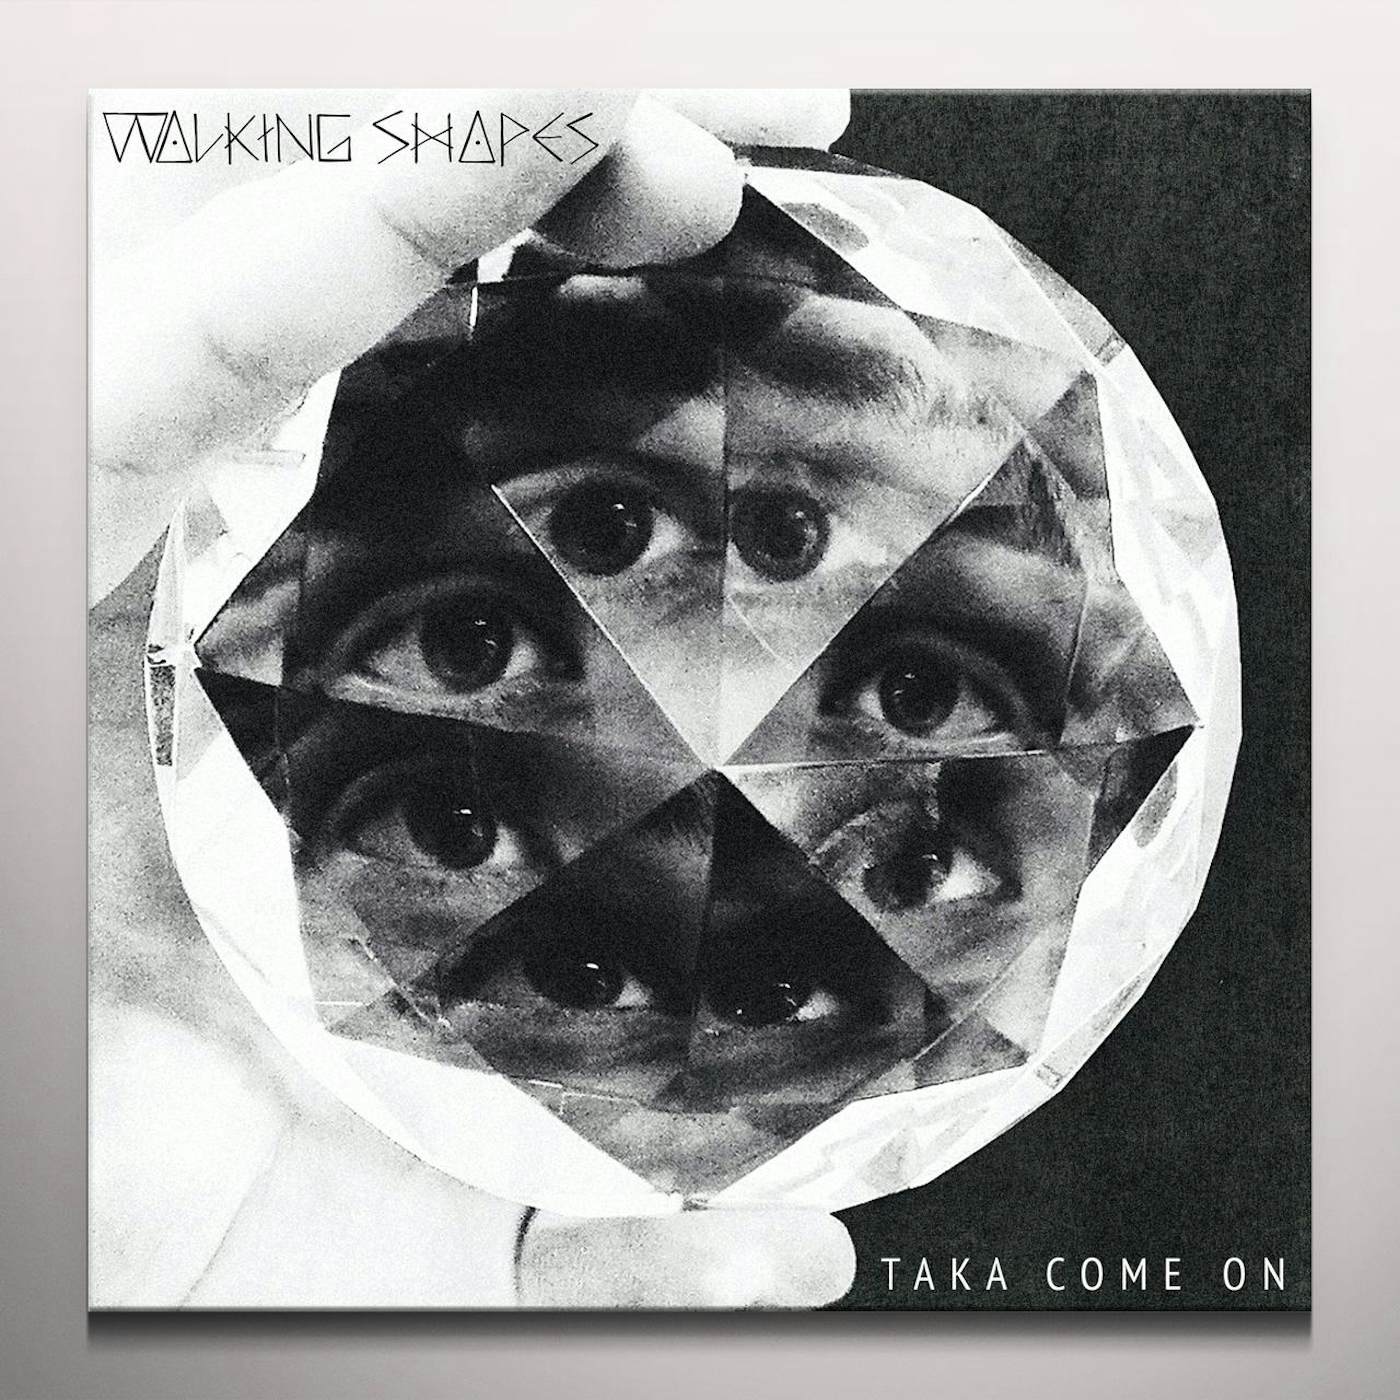 Walking Shapes Taka Come On Vinyl Record